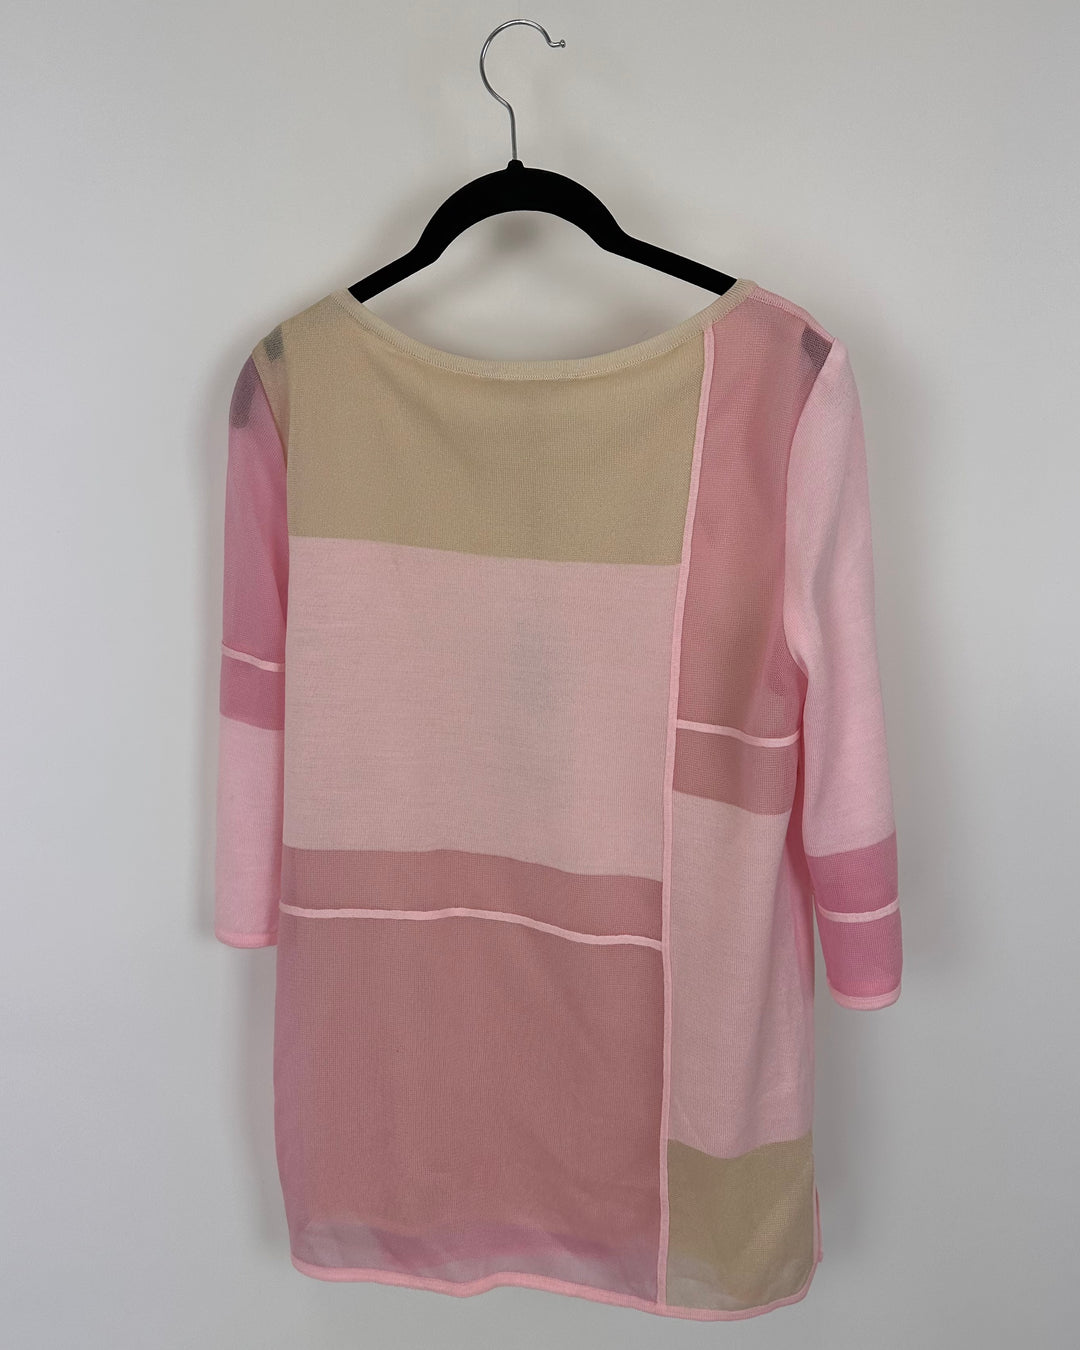 Pink and Tan Colorblock Top - Size 2/4 and and 8/10